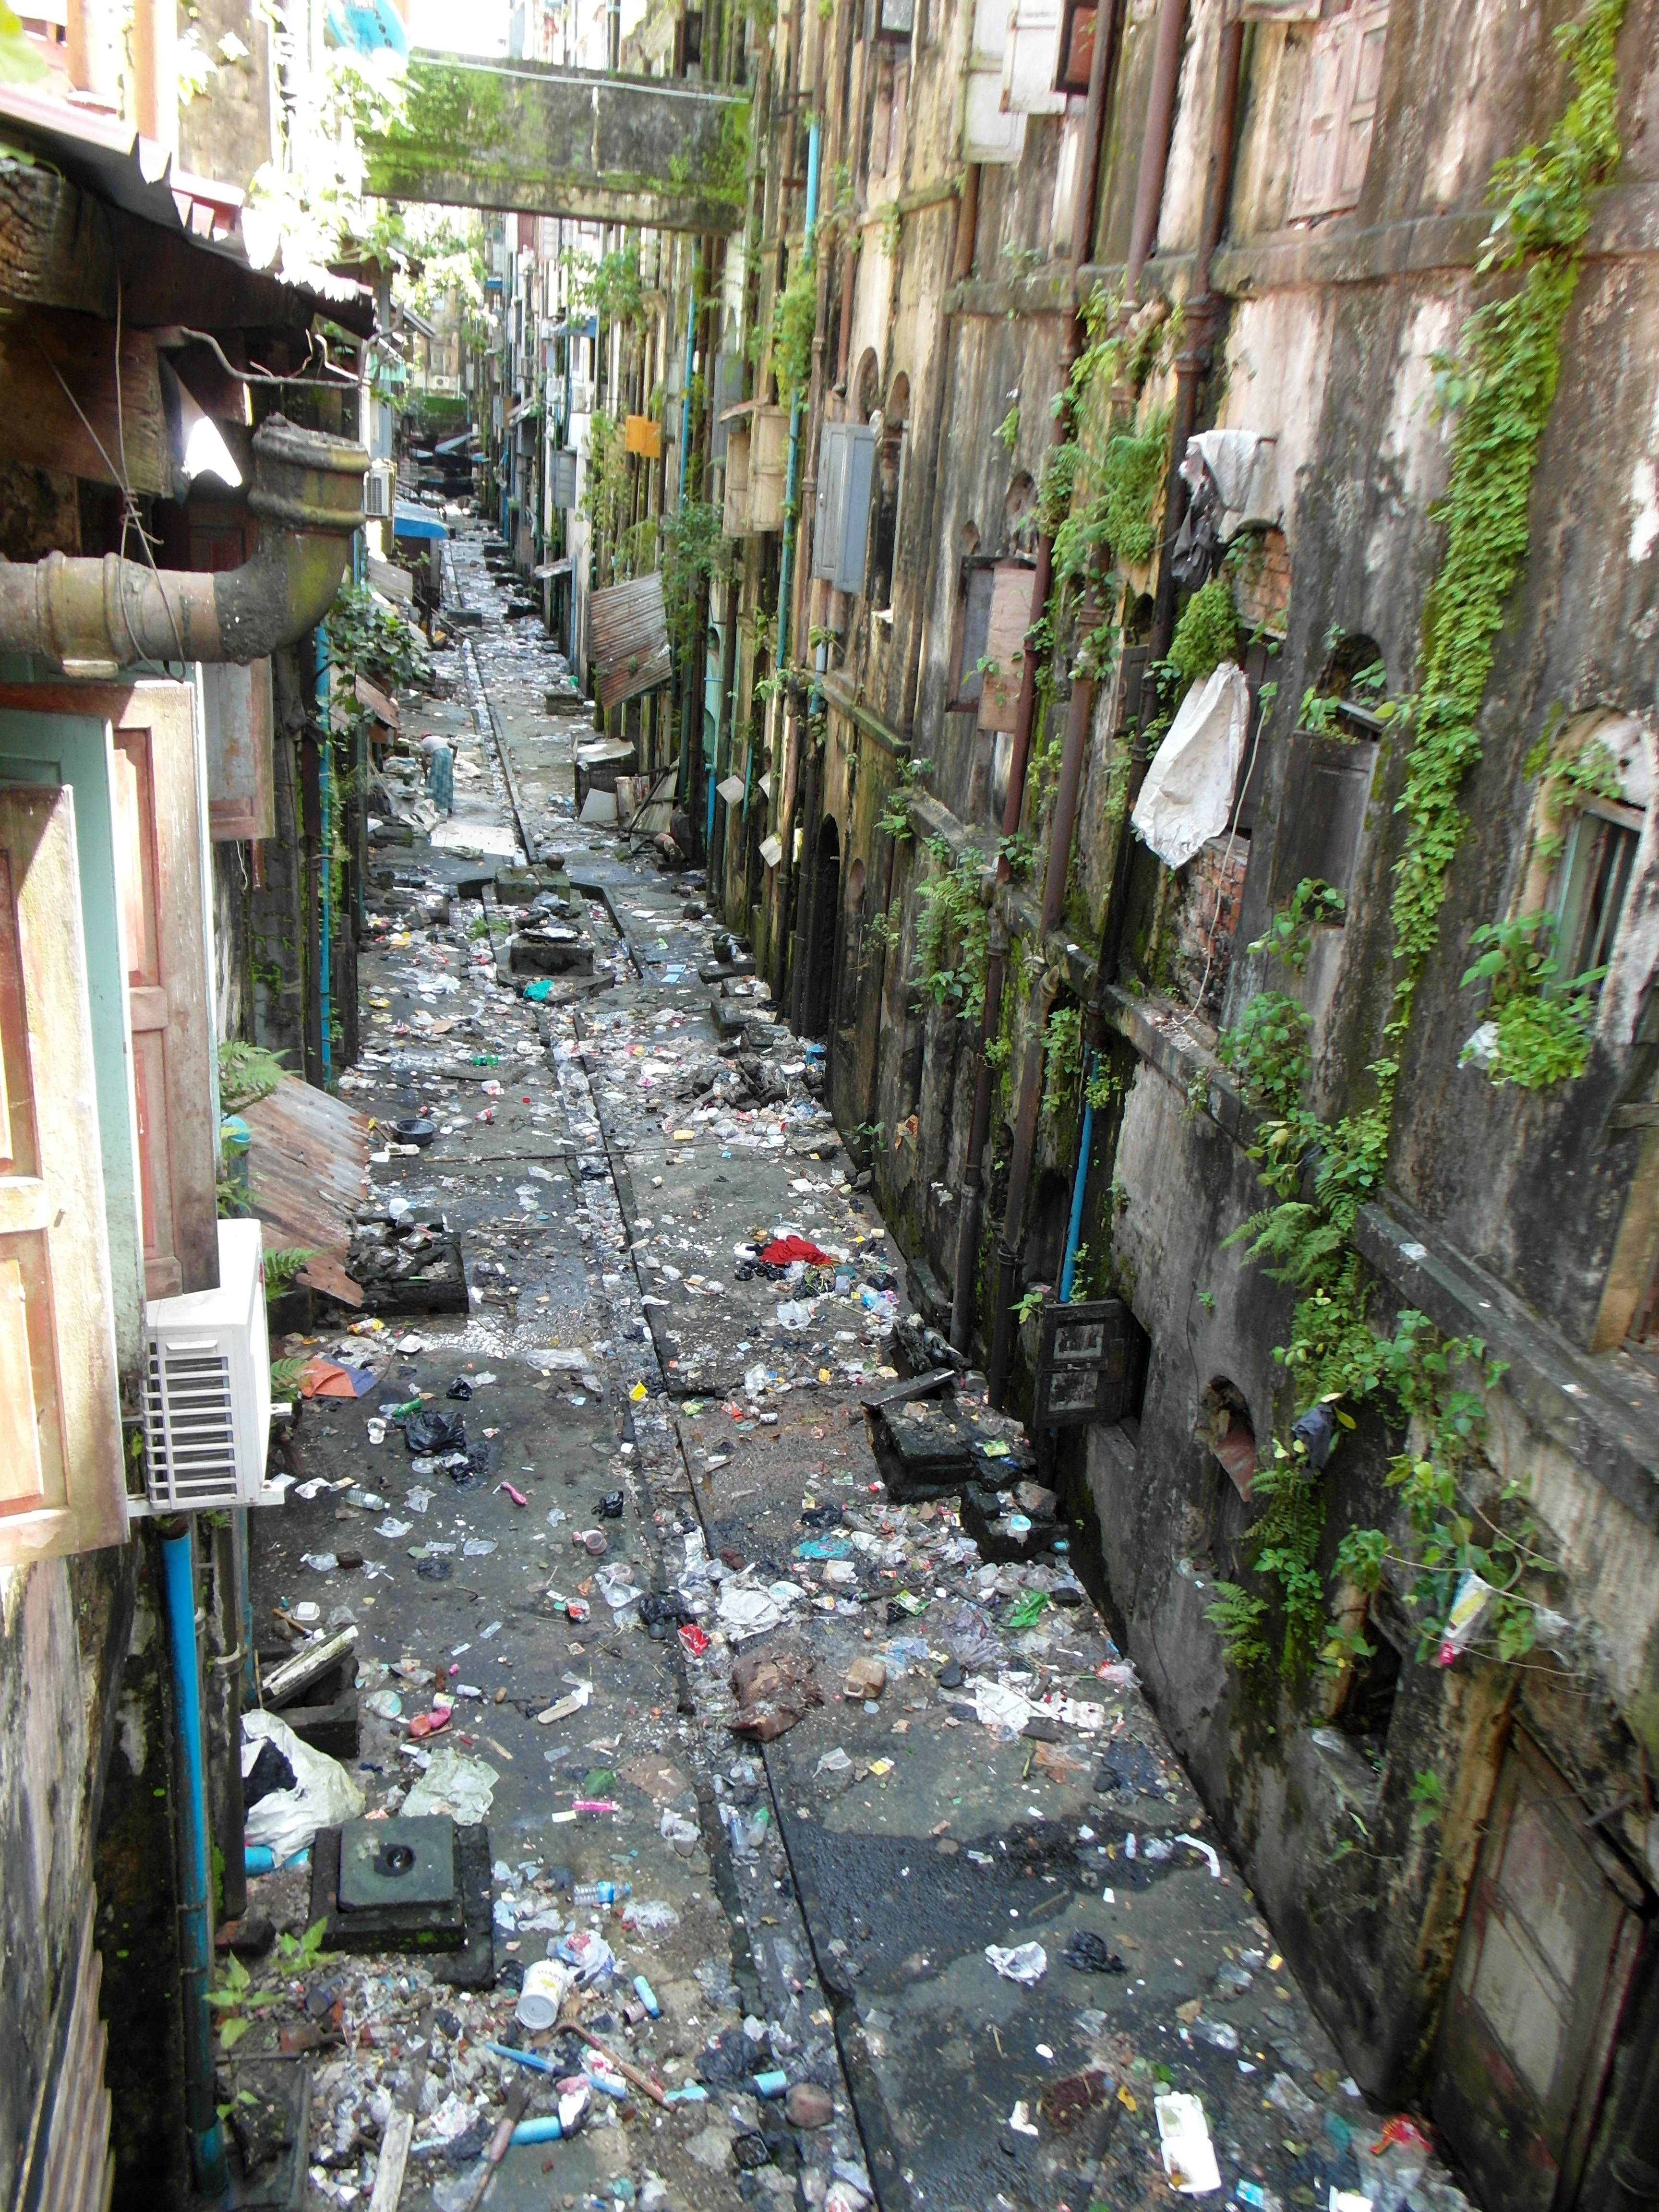 Dirty street back alley in Yangon Myanmar image - Free stock photo - Public Domain photo - CC0 Images